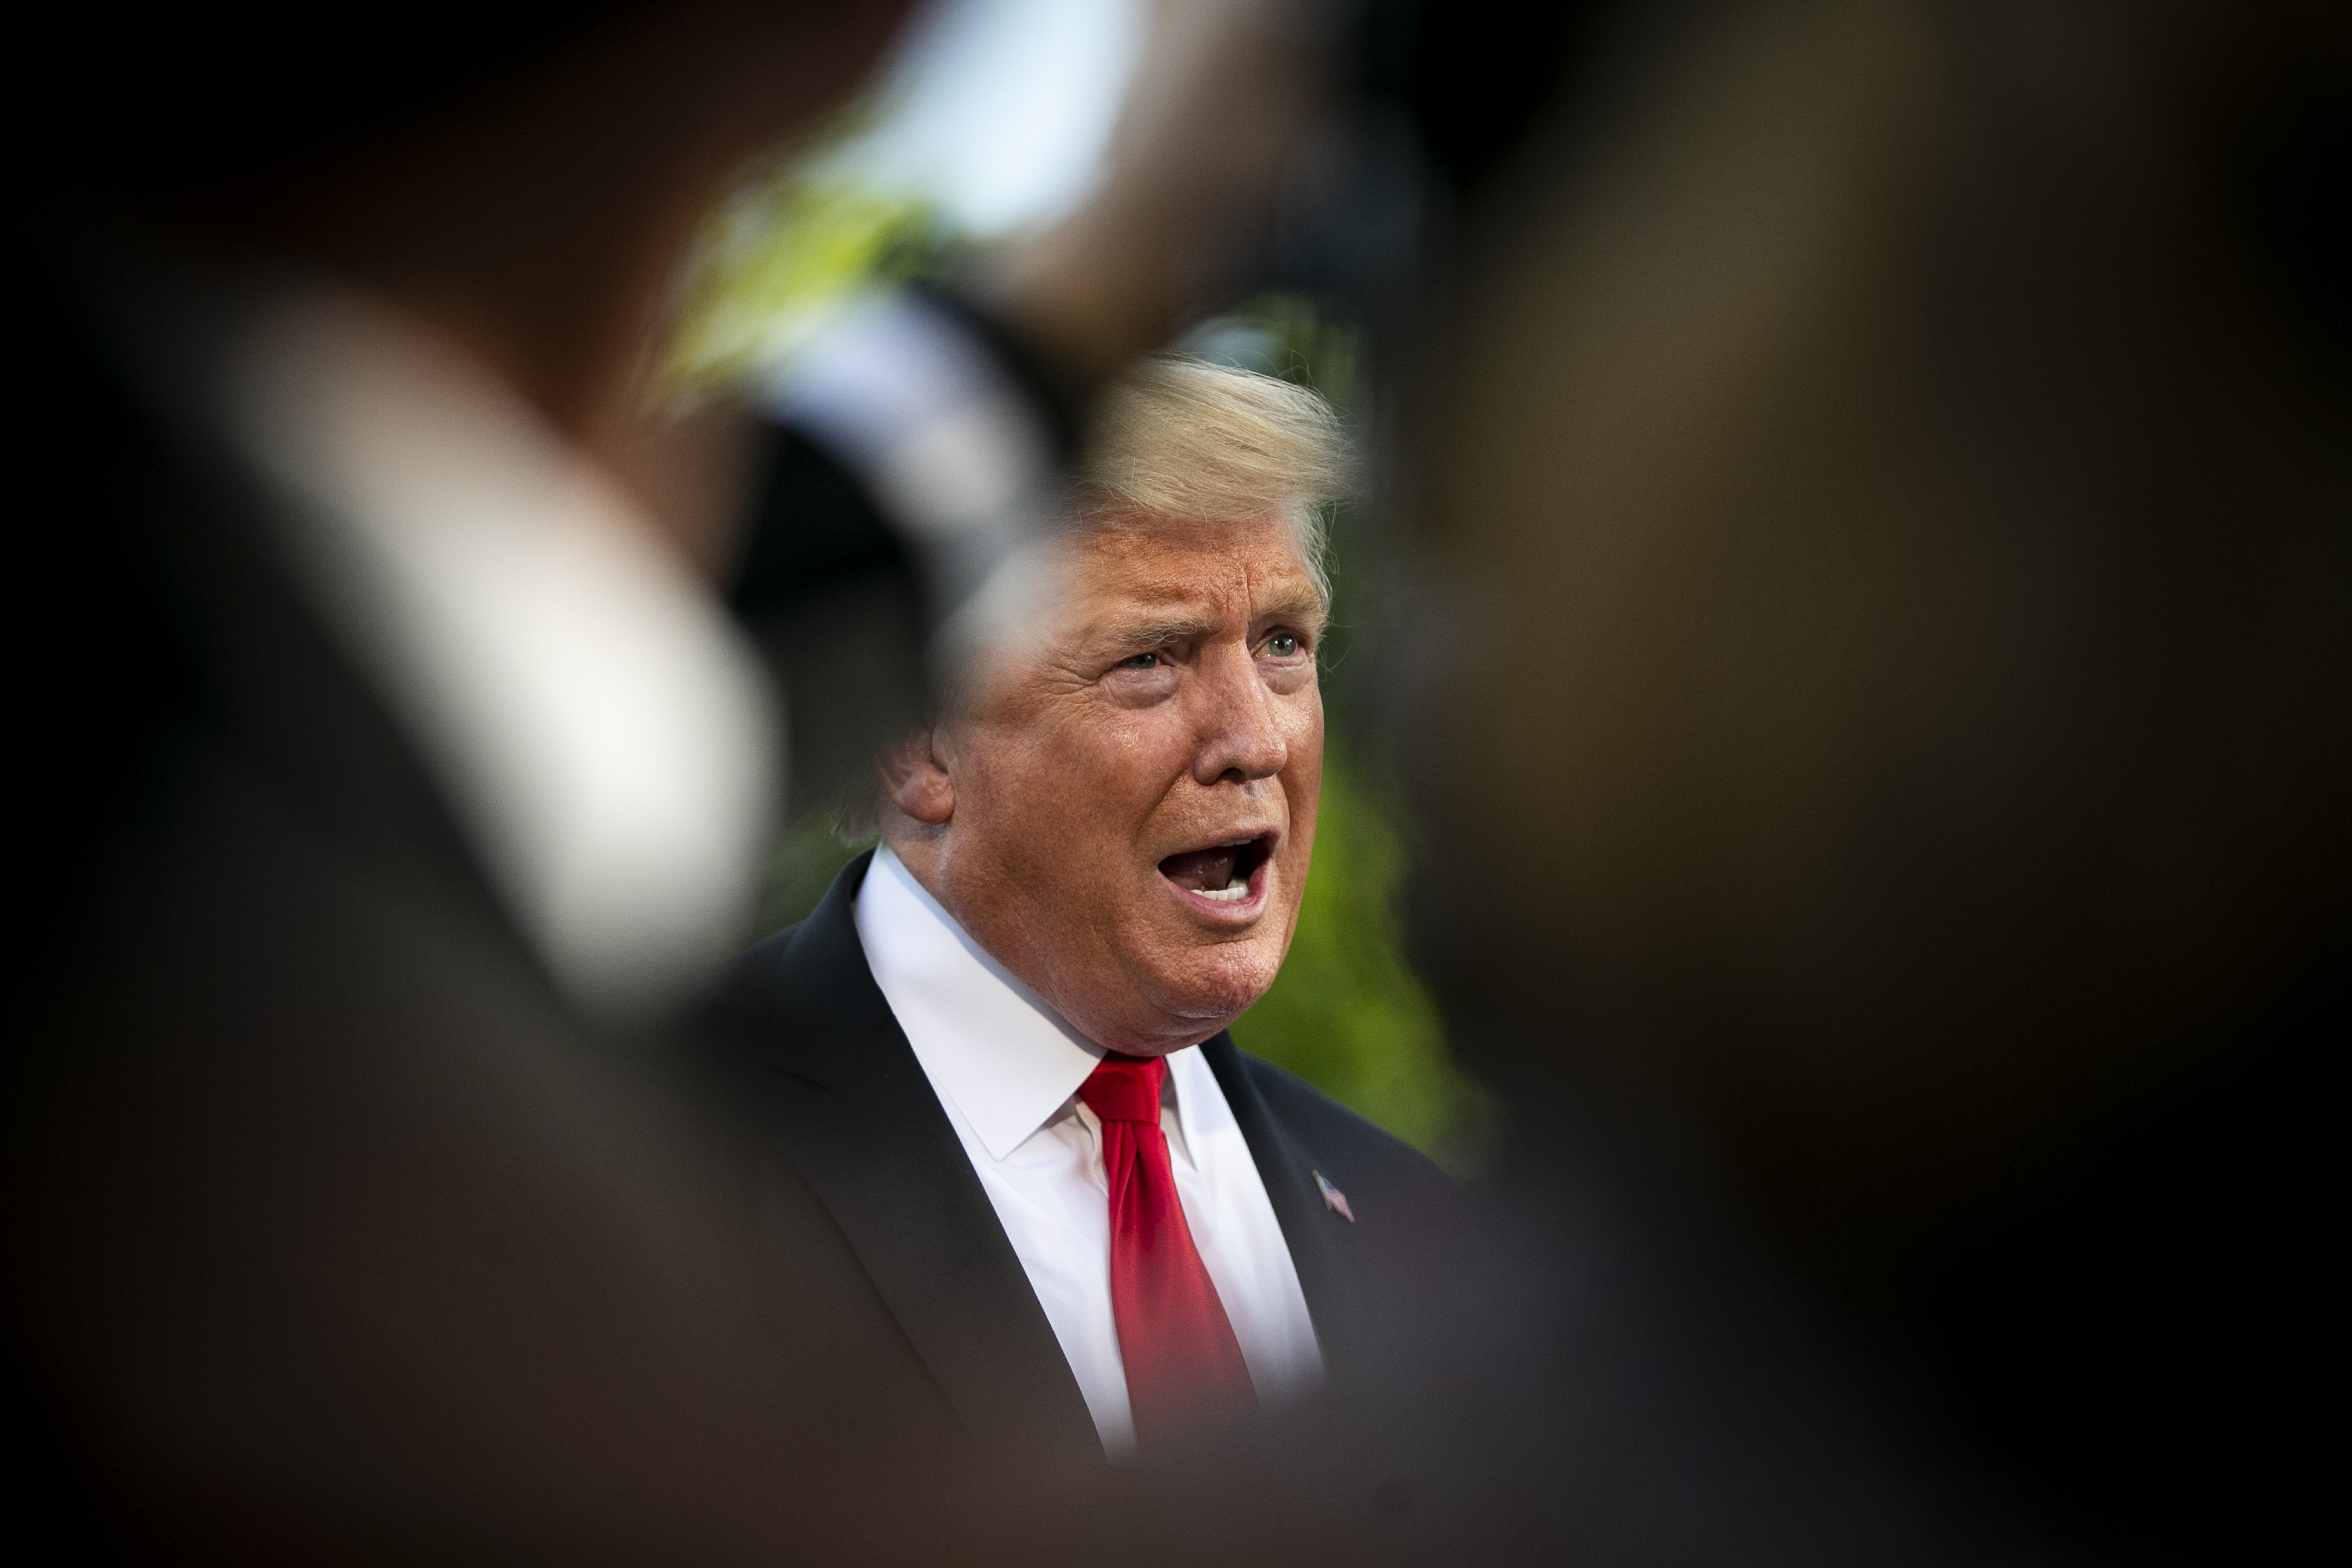 U.S. President Donald Trump speaks to members of the media before boarding Marine One on the South Lawn of the White House in Washington, D.C., U.S., on Monday, May 20, 2019. Trump is heading to Pennsylvania to campaign for Republican Fred Keller.